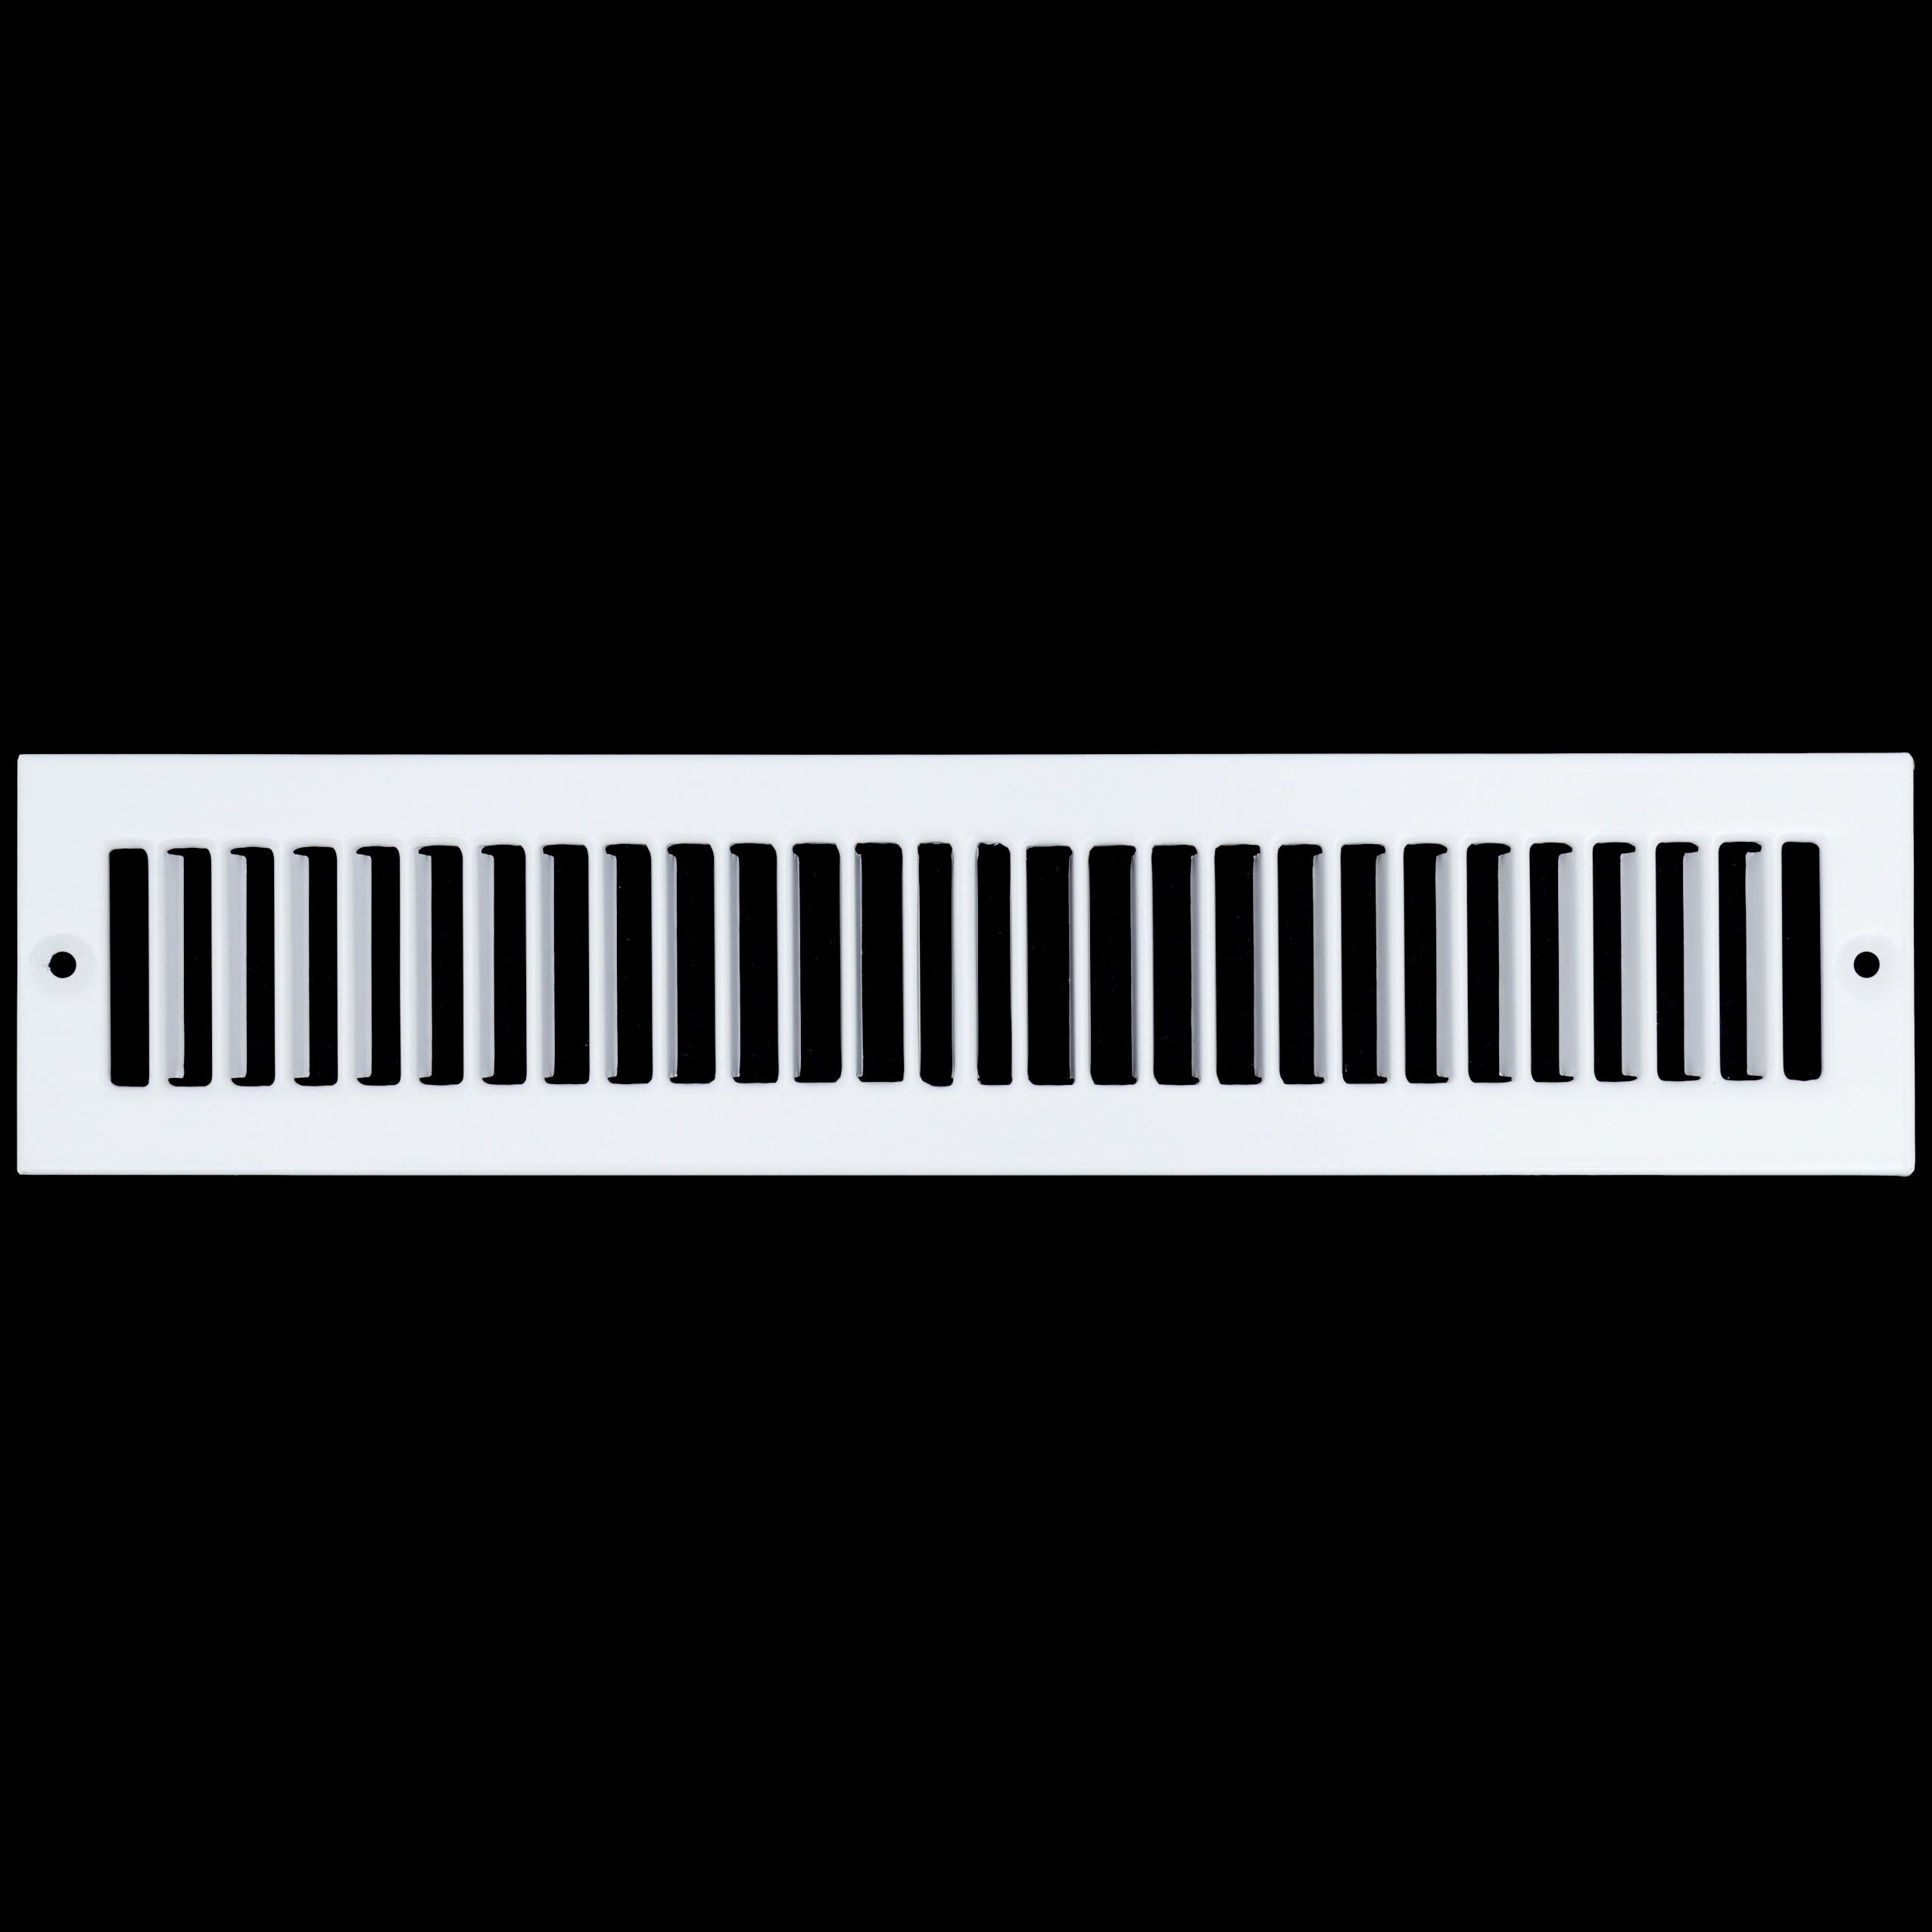 airgrilles 2" x 14" toe kick register grille   vent cover   outer dimensions: 3.5" x 15.5"   white hnd-tgs-wh-2x14  - 1